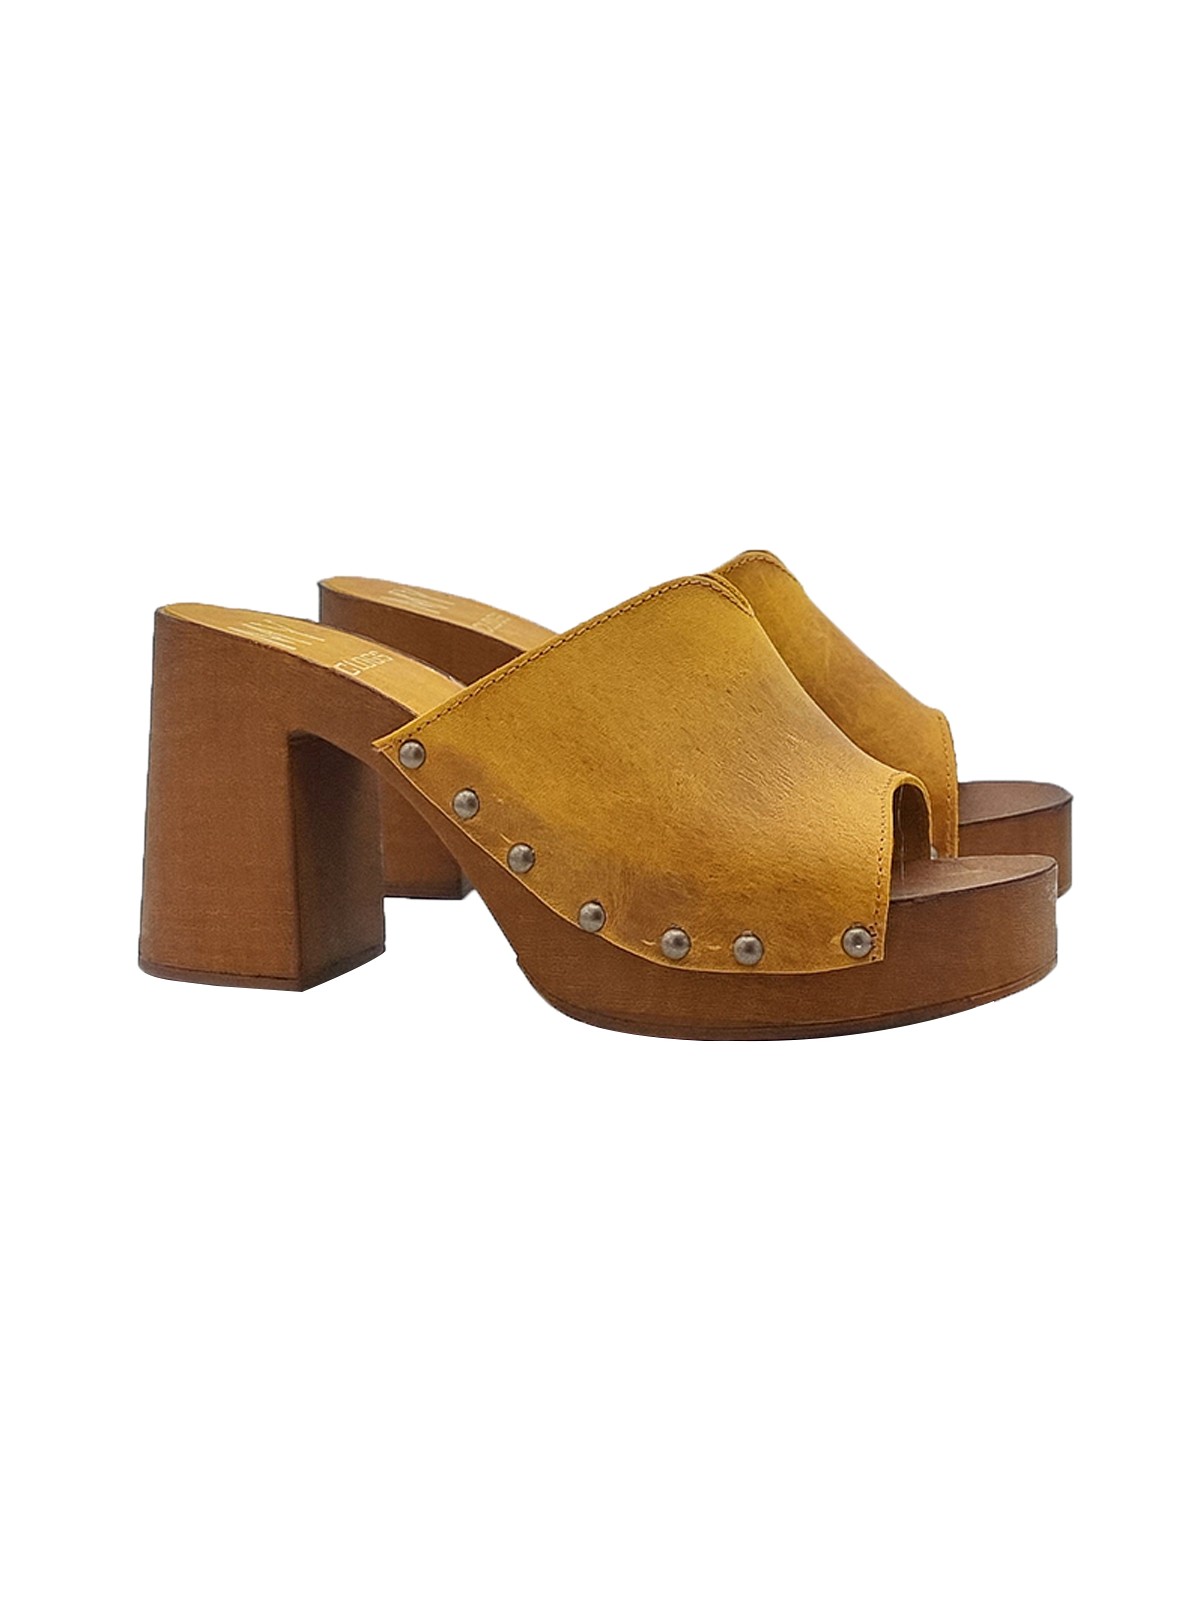 CLOGS IN OCHER LEATHER WITH 8,5 CM WIDE HEEL